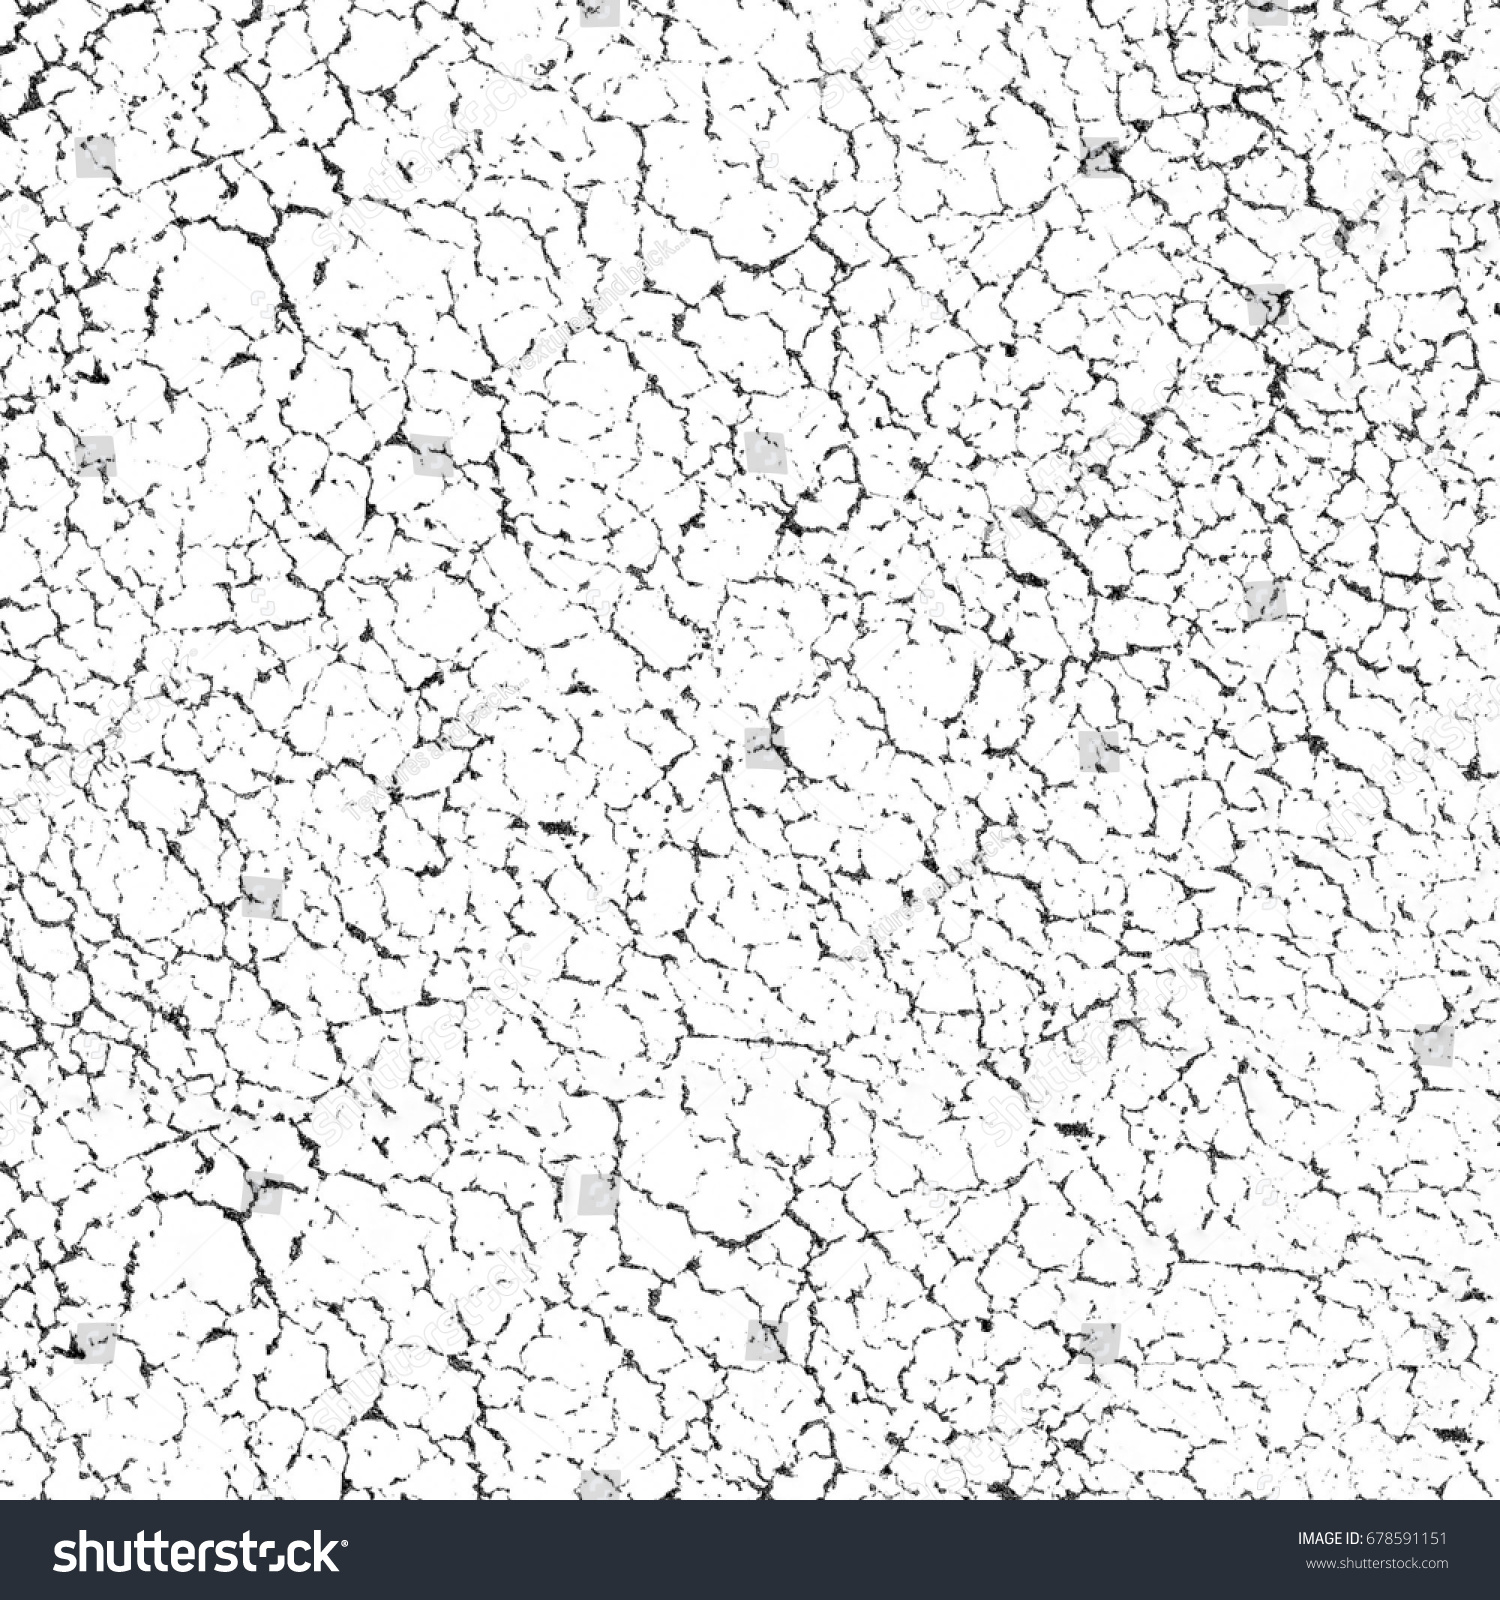 Abstract grunge background of black and white. Black white vintage texture. Old background from cracks, stains, damage #678591151